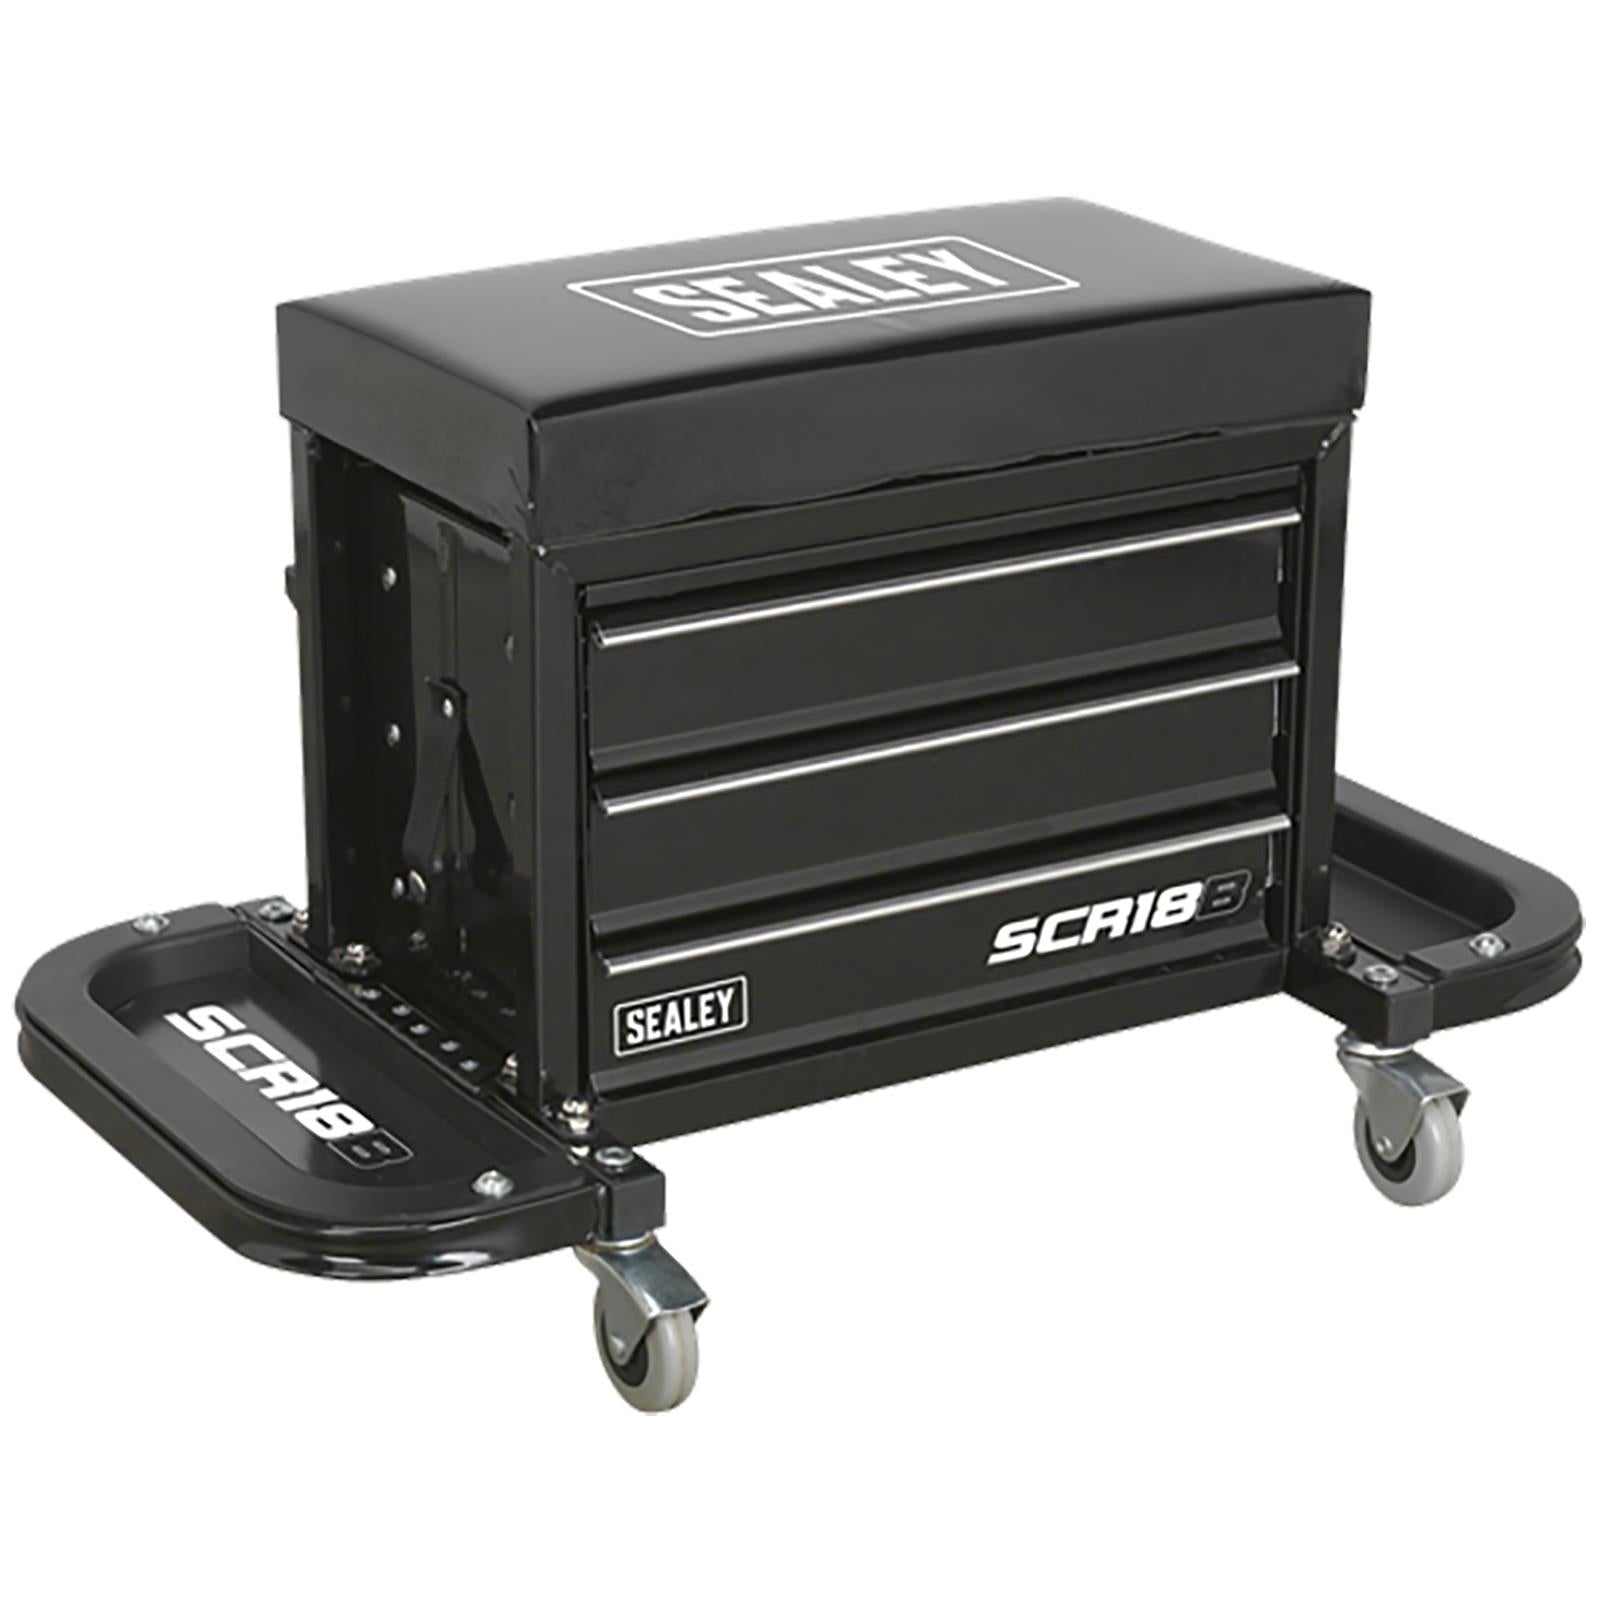 Sealey Mechanics Rolling Utility Seat and Toolbox with Drawers Black